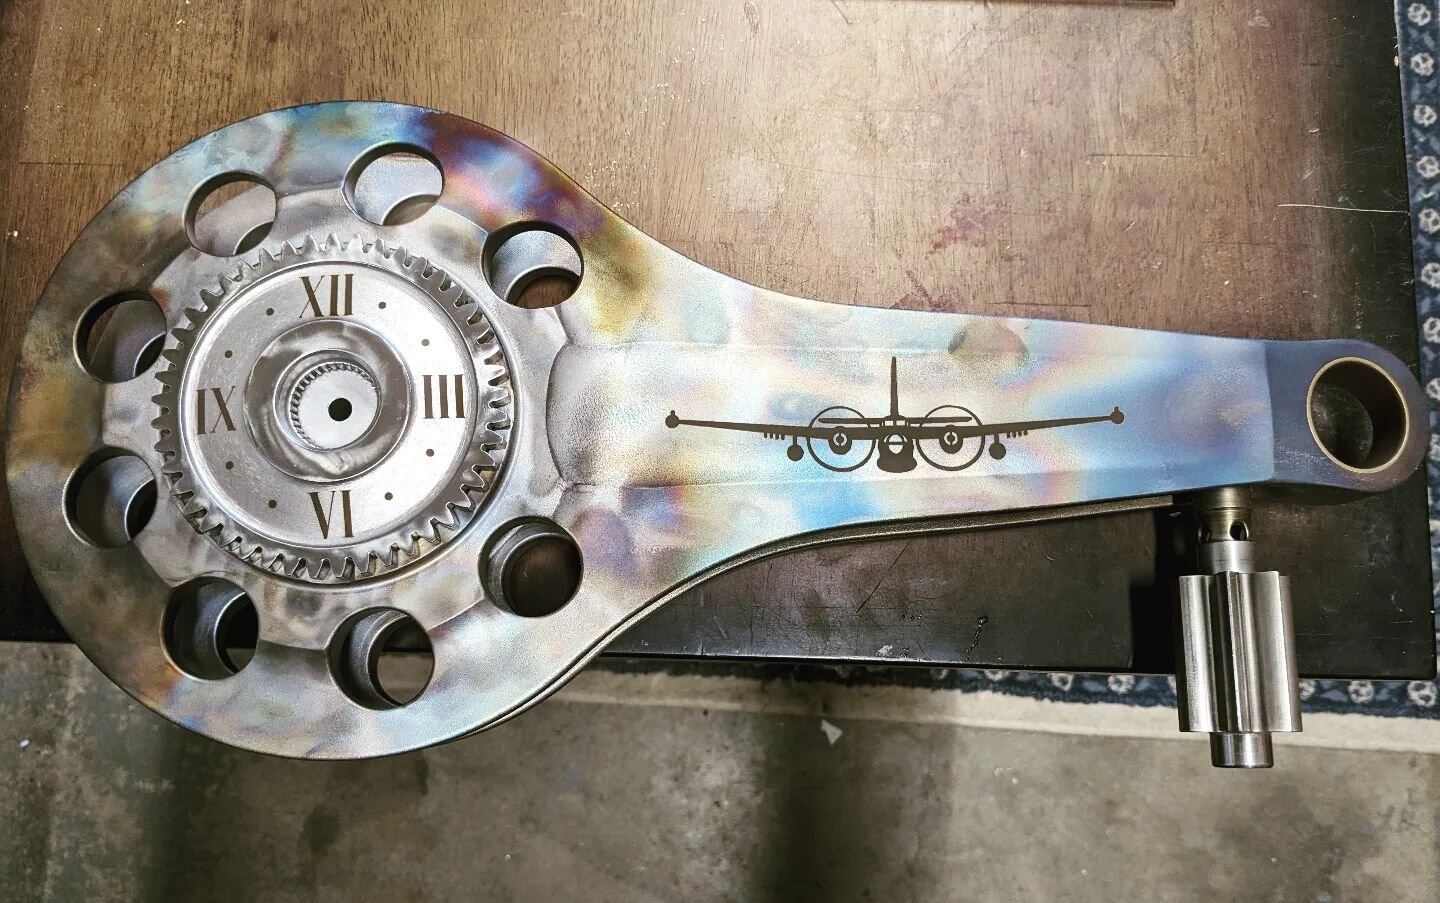 Pretty cool project for a local airplane mechanic to build a clock out of an old P2V air tanker part. TGIF!
&middot;
&middot;
&middot;
#laserengraving #laserengraved #laserengrave #lasermarked #lasermark #lasermarking #fiberlaser #airplane #blackmoun